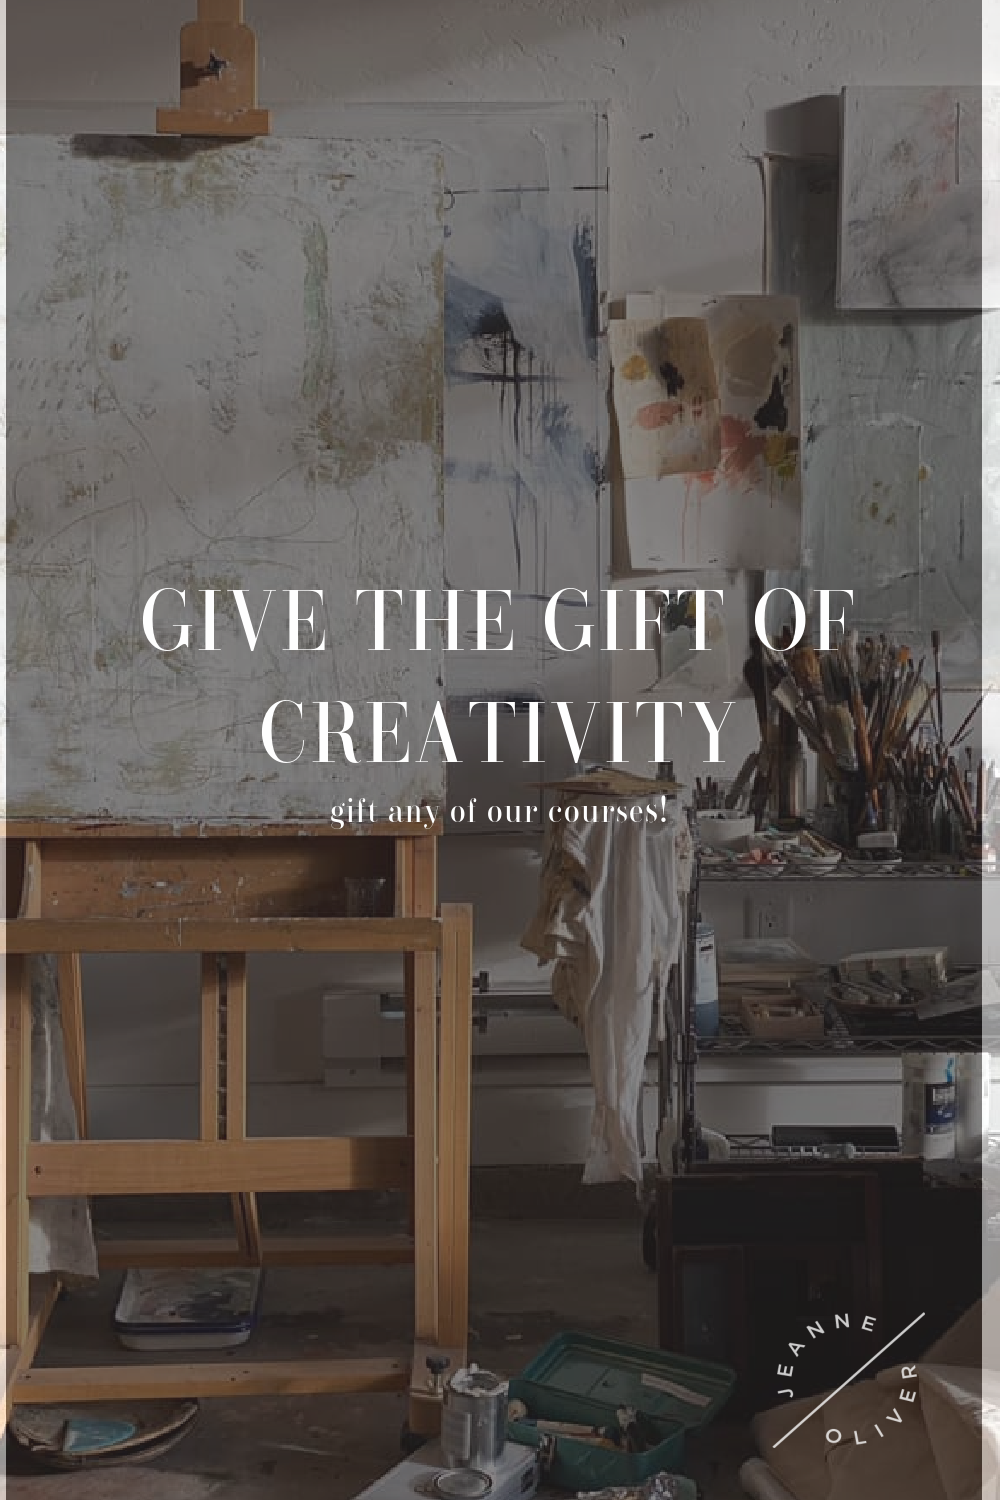 Gift an Online Art, Lifestyle or Business Course | The PERFECT Stocking Stuffer